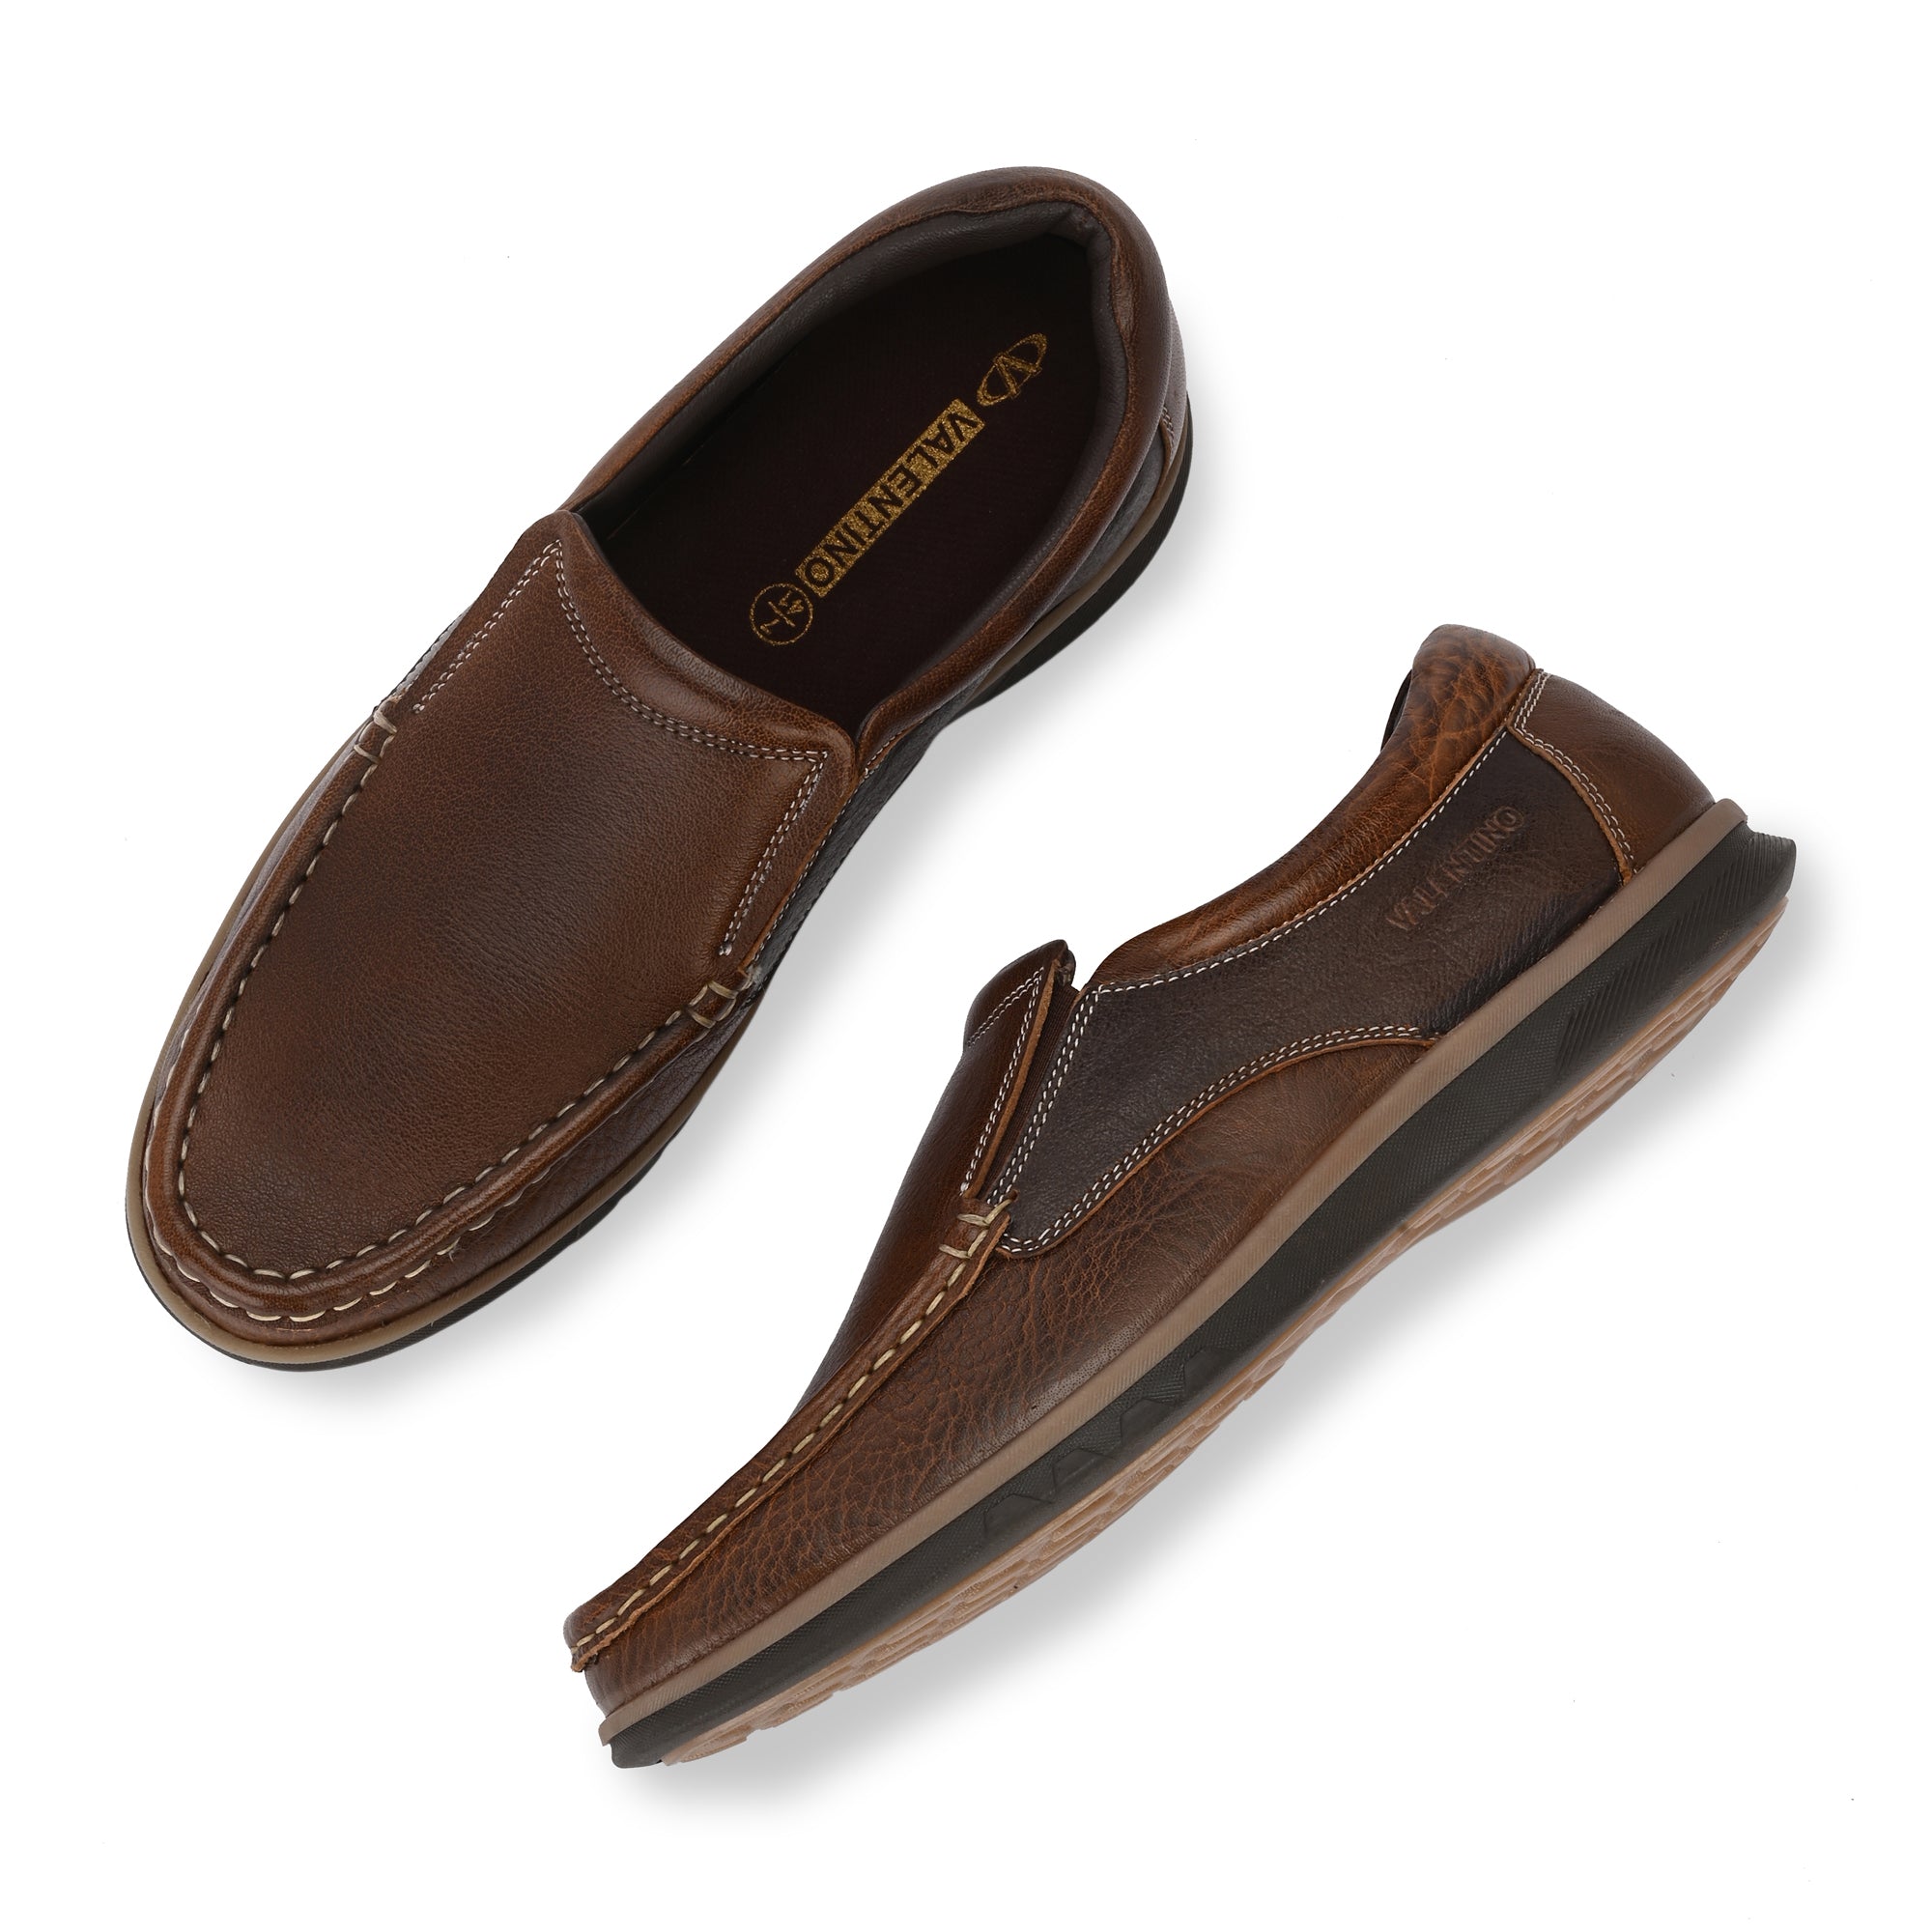 FASCINATE-02 MEN LEATHER TAN CASUAL SLIP ON MOCCASSINS